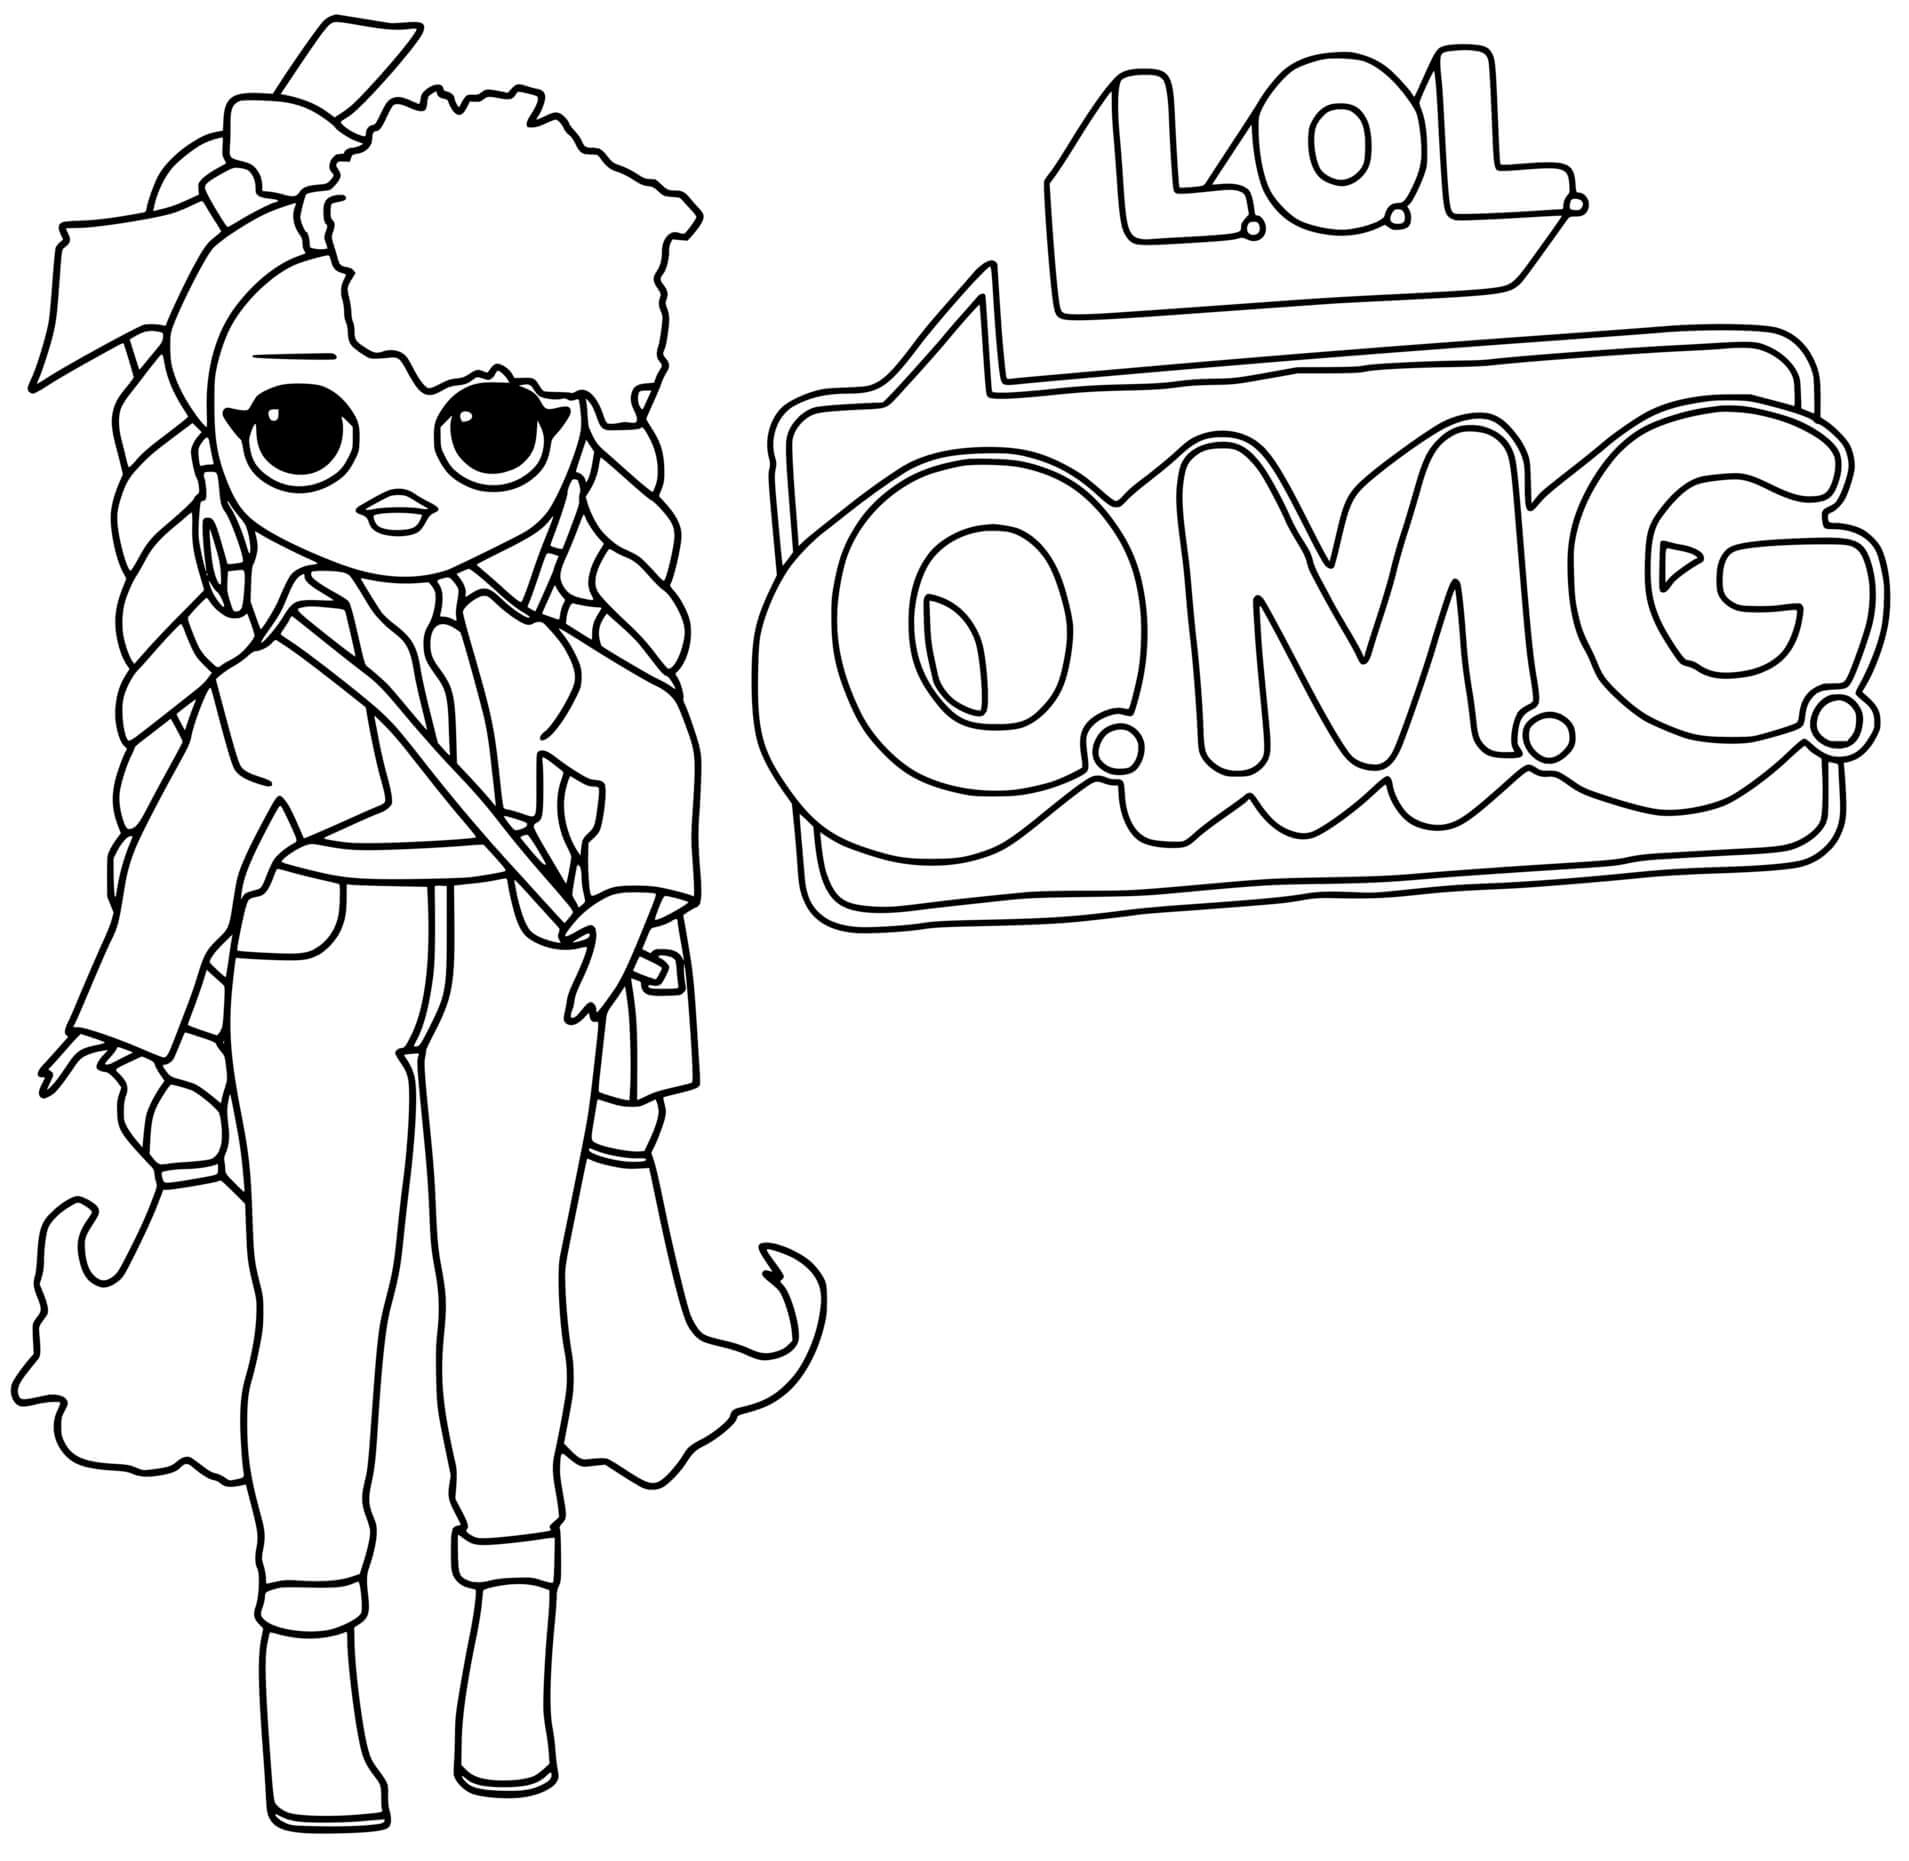 Lol Omg Logo Chillax Girl Coloring Page